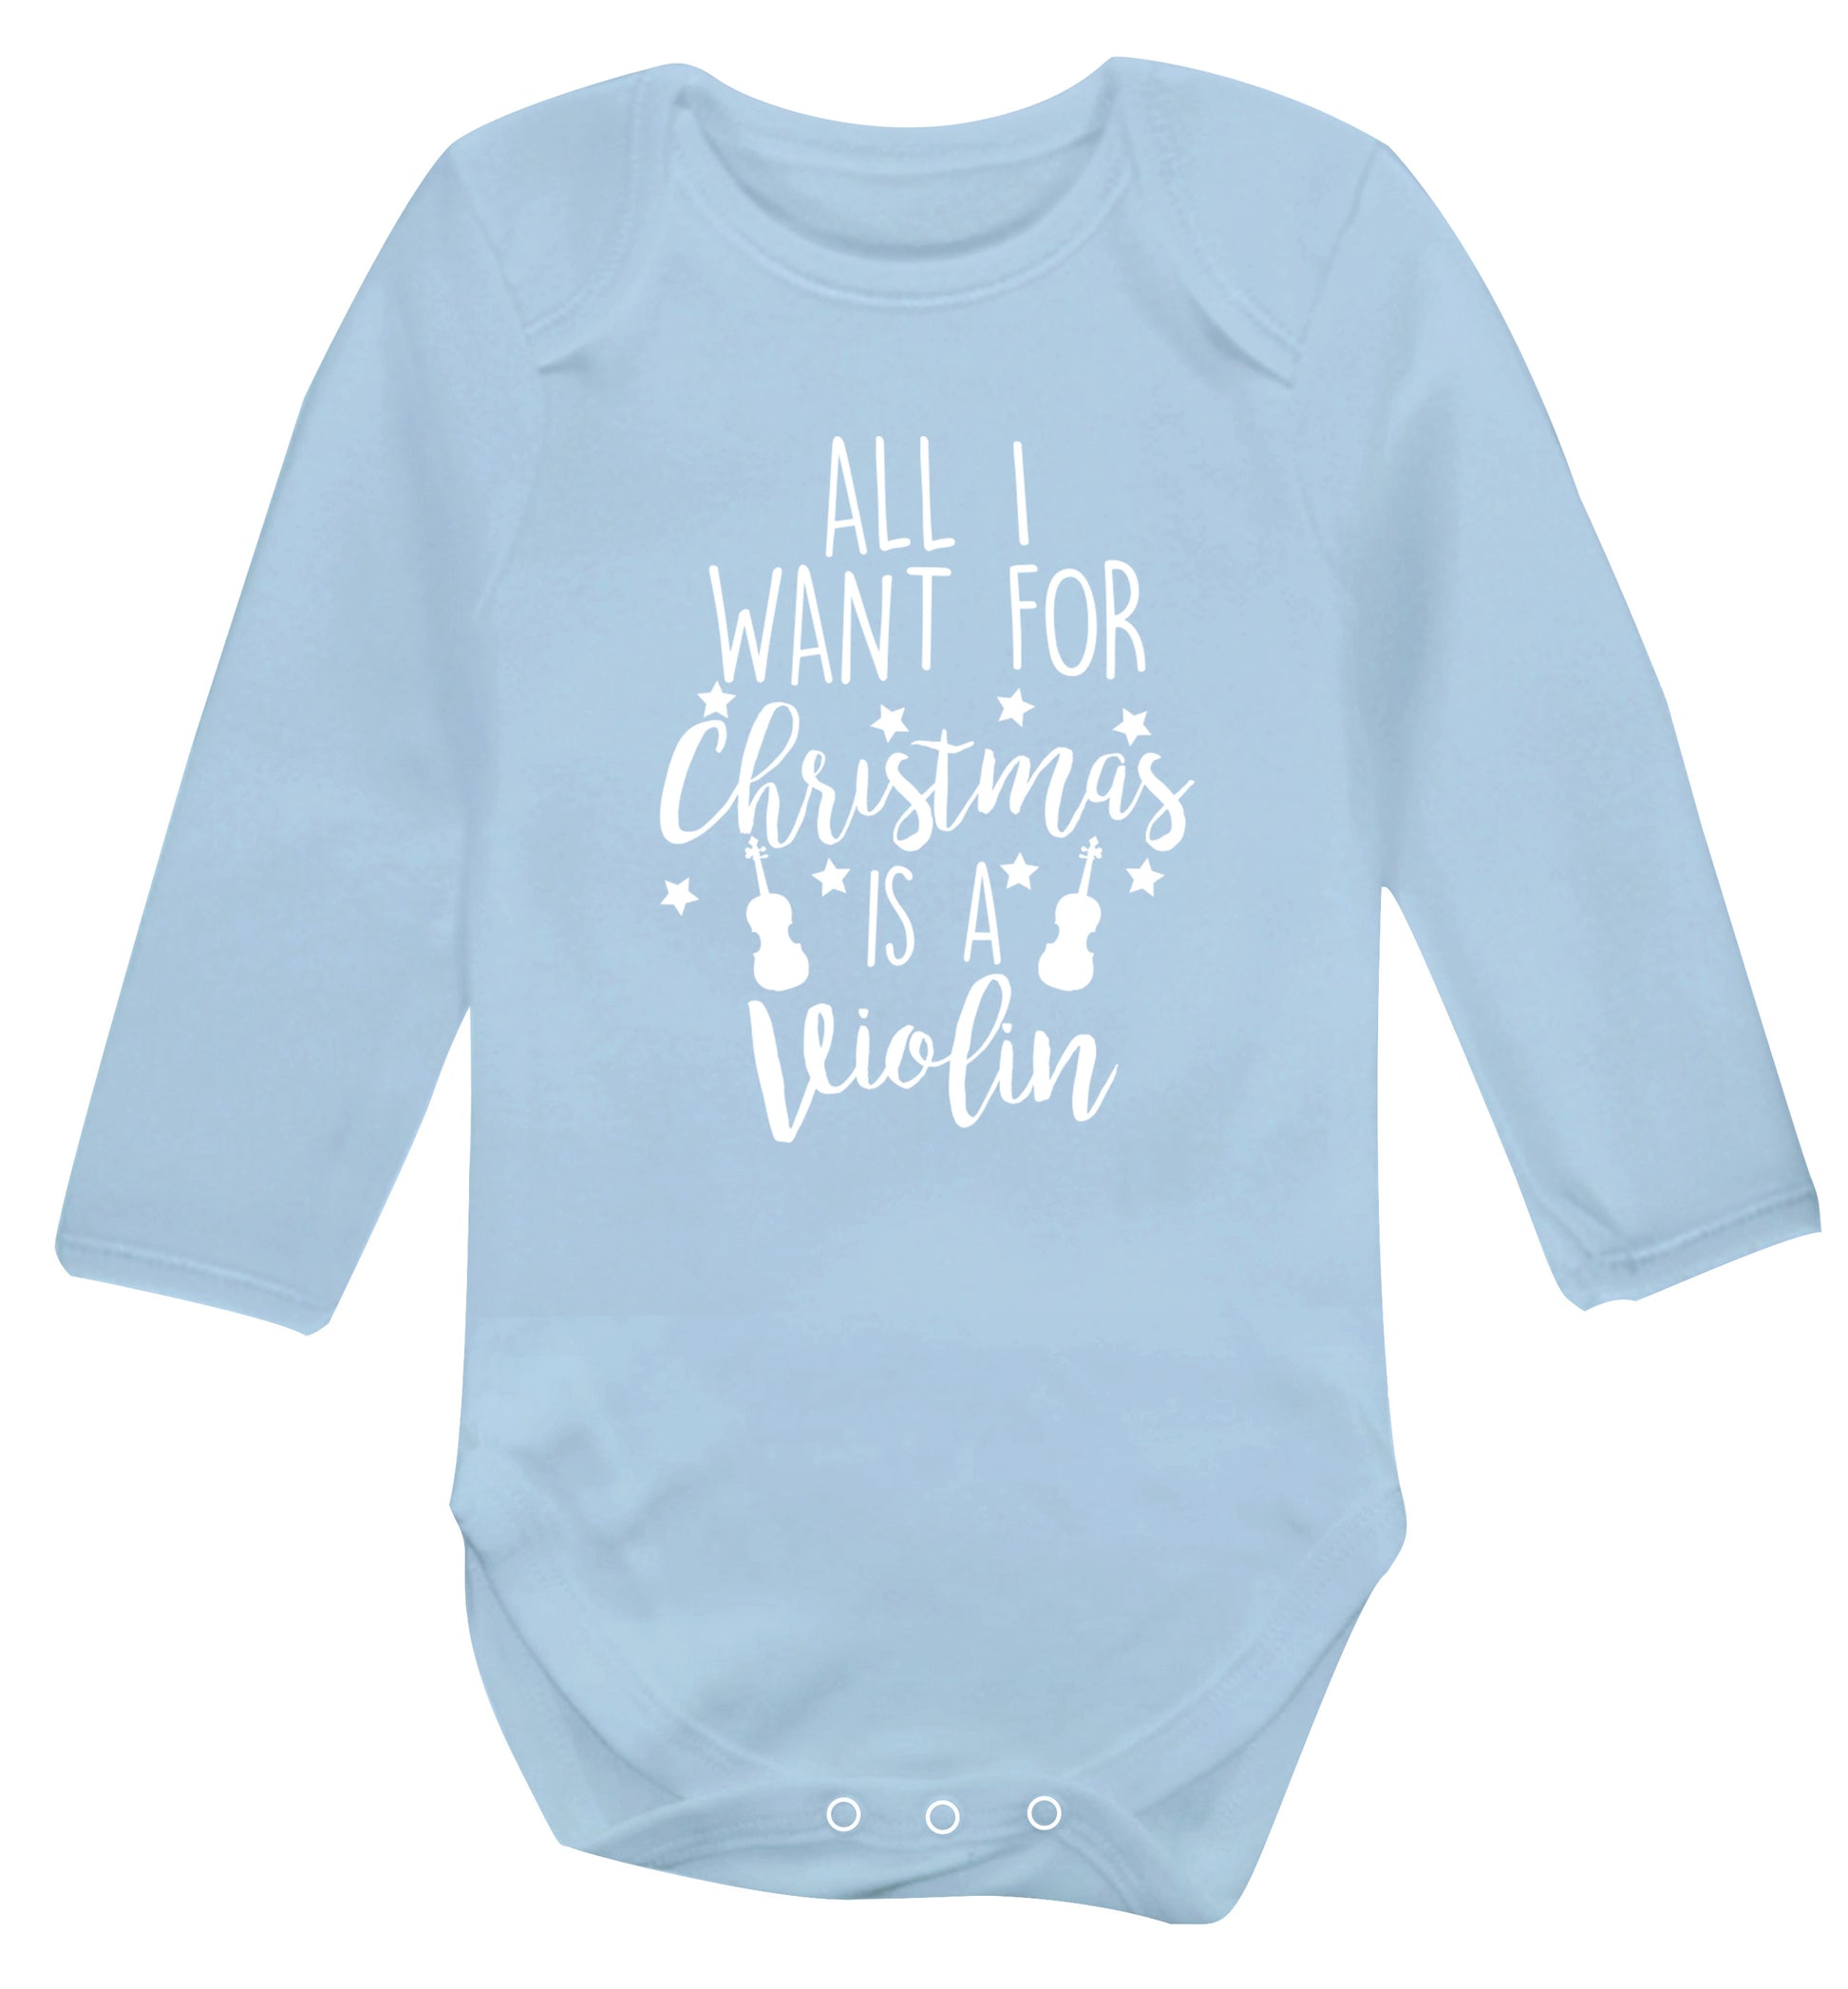 All I Want For Christmas is a Violin Baby Vest long sleeved pale blue 6-12 months